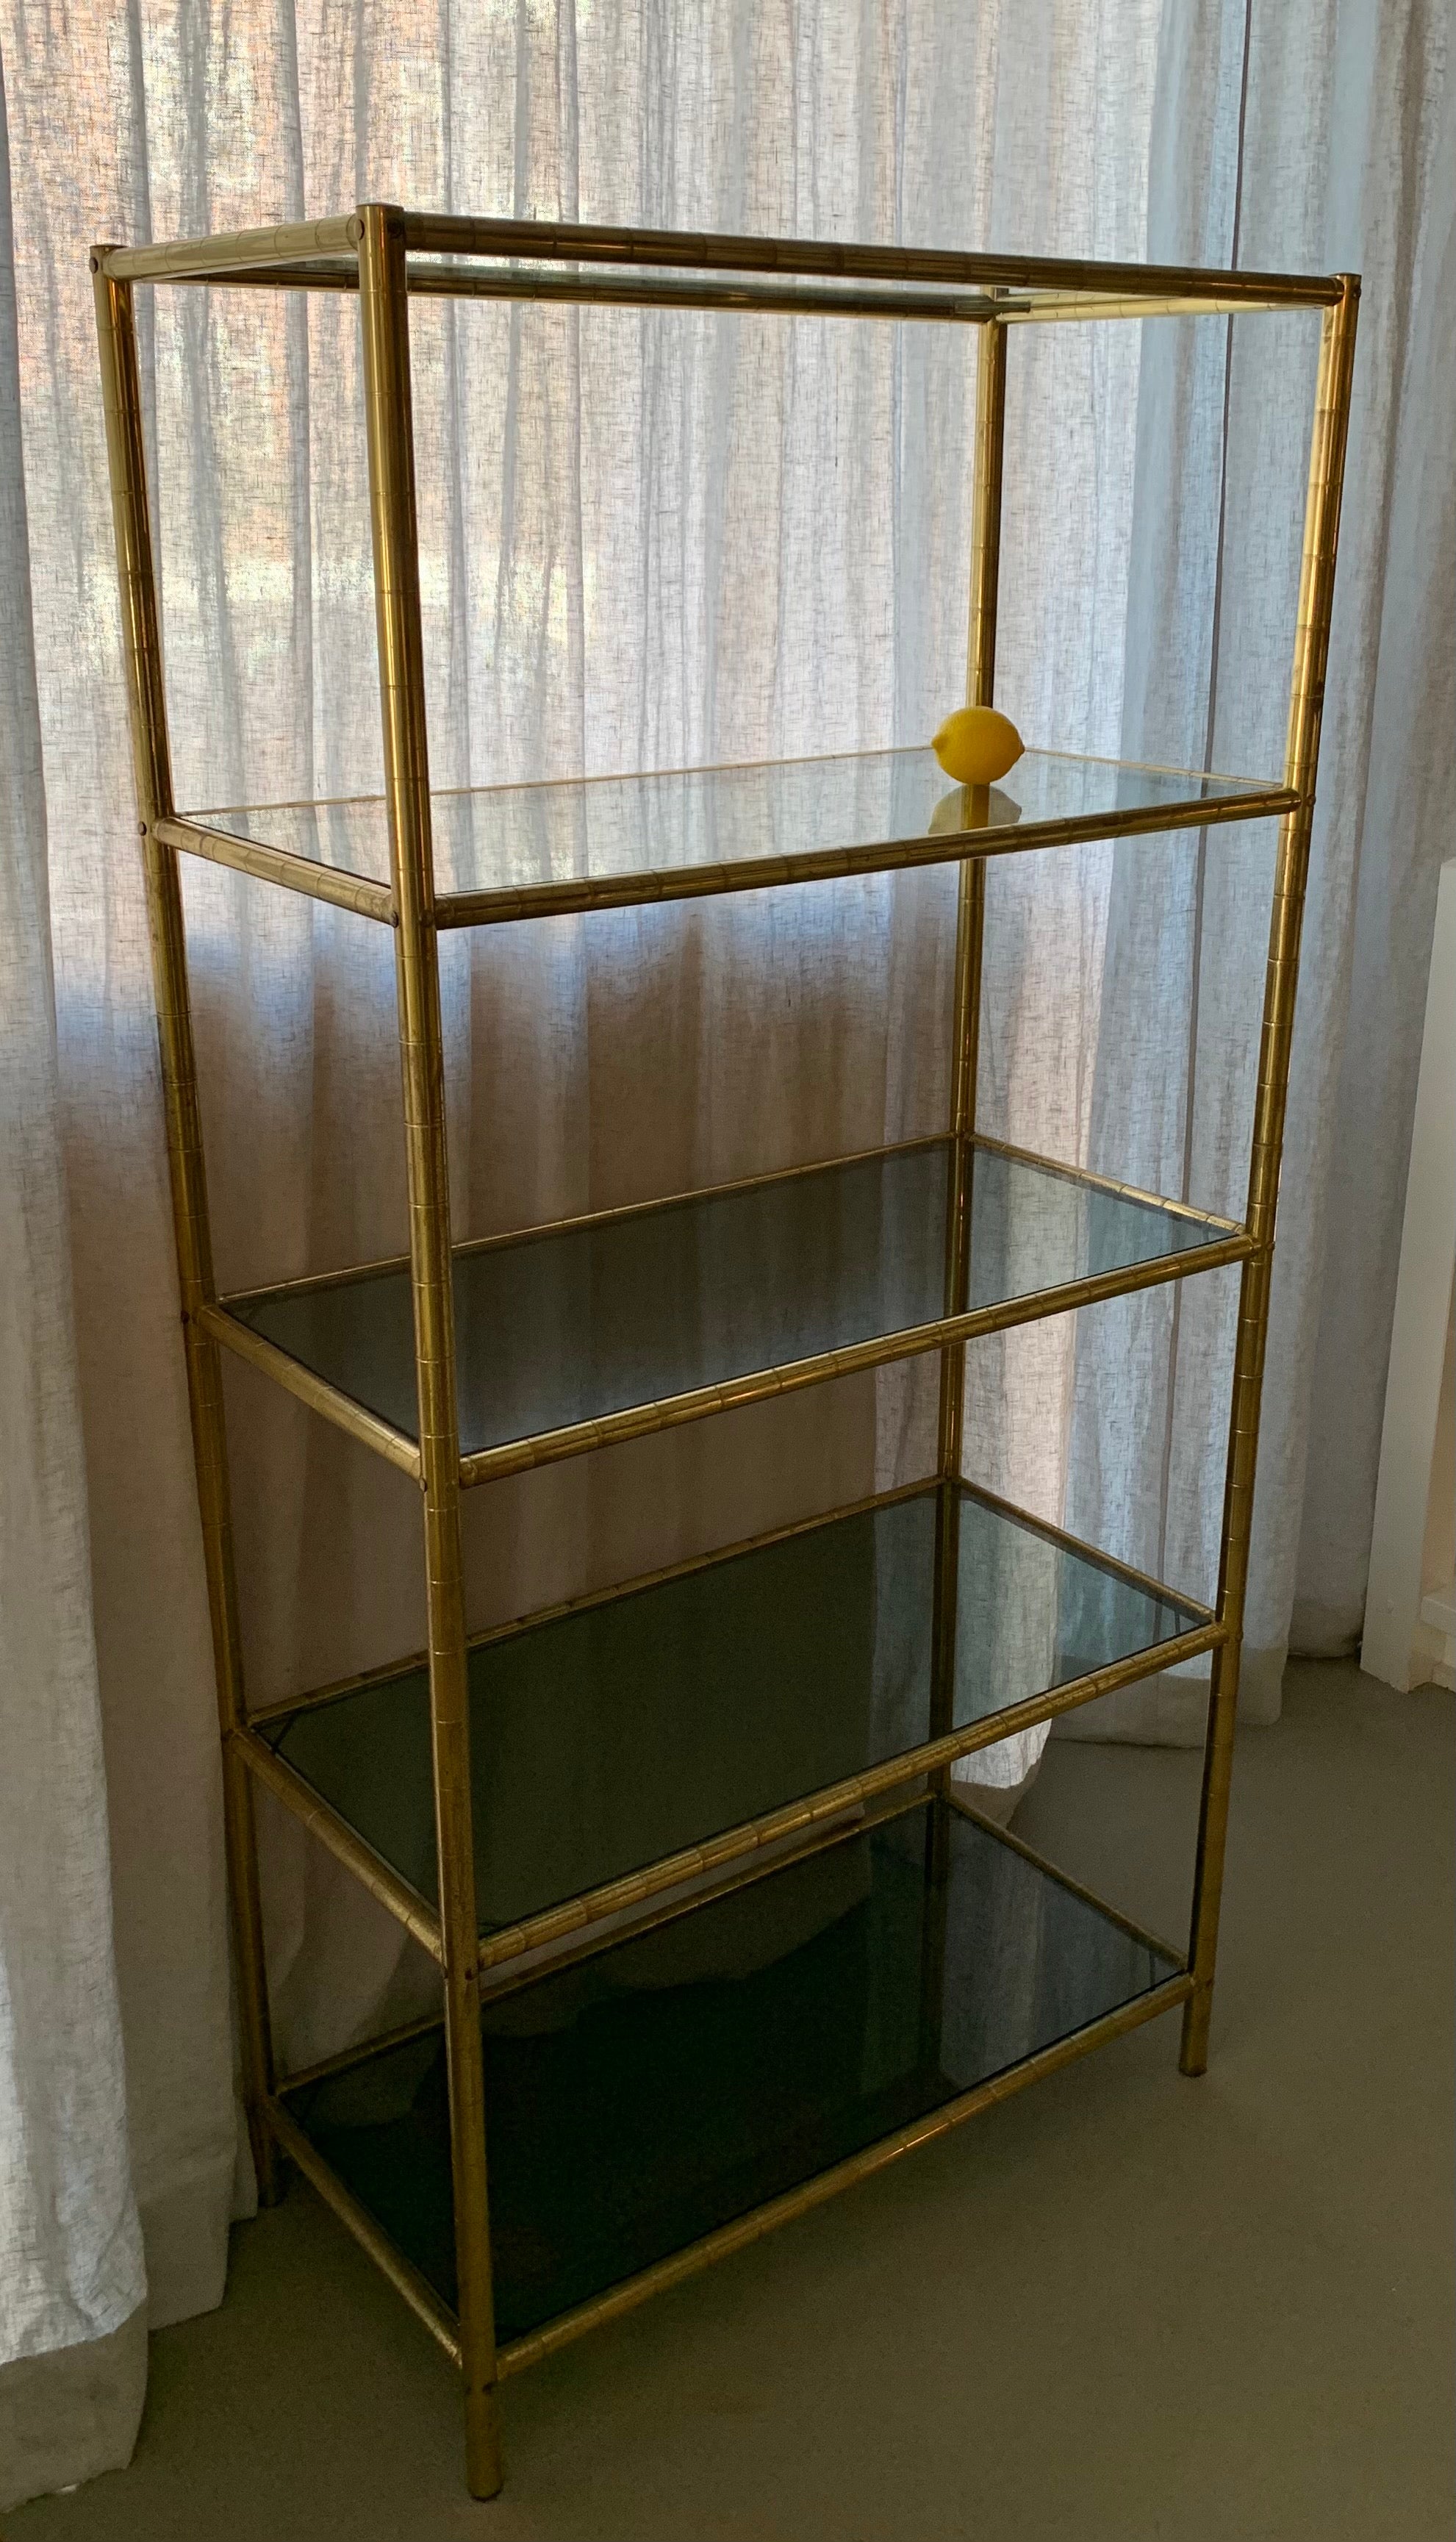 Cool French vintage 1970s bookcase or display unit. The decorative - Faux Bambou - brass base holds 5 smoked glass shelves.
